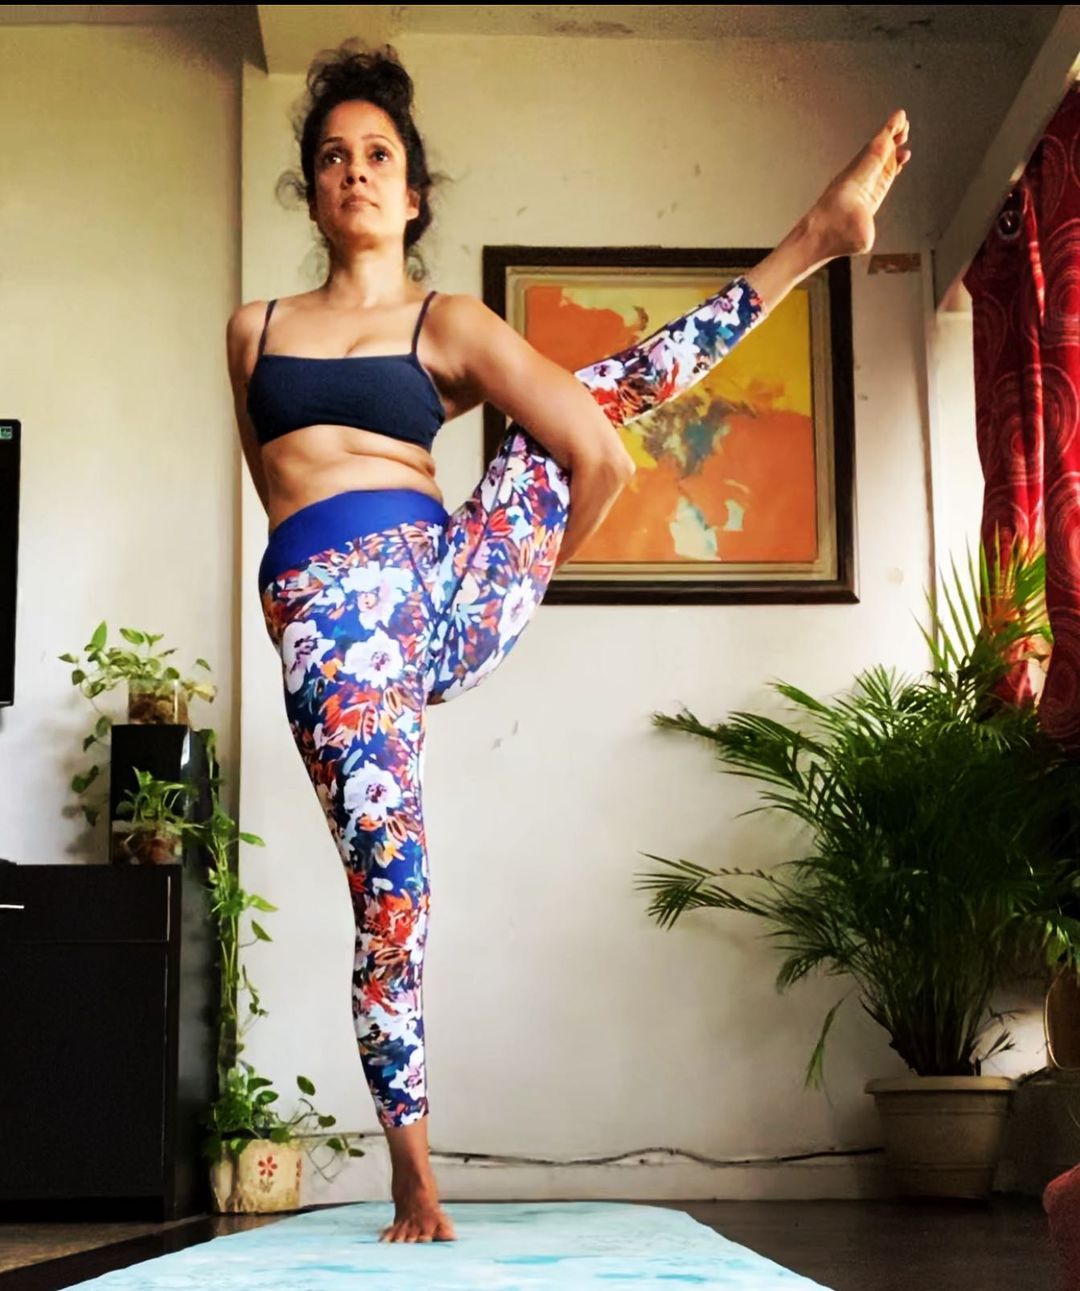  Vidya aces a very difficult asana with ease. (Image: Instagram)